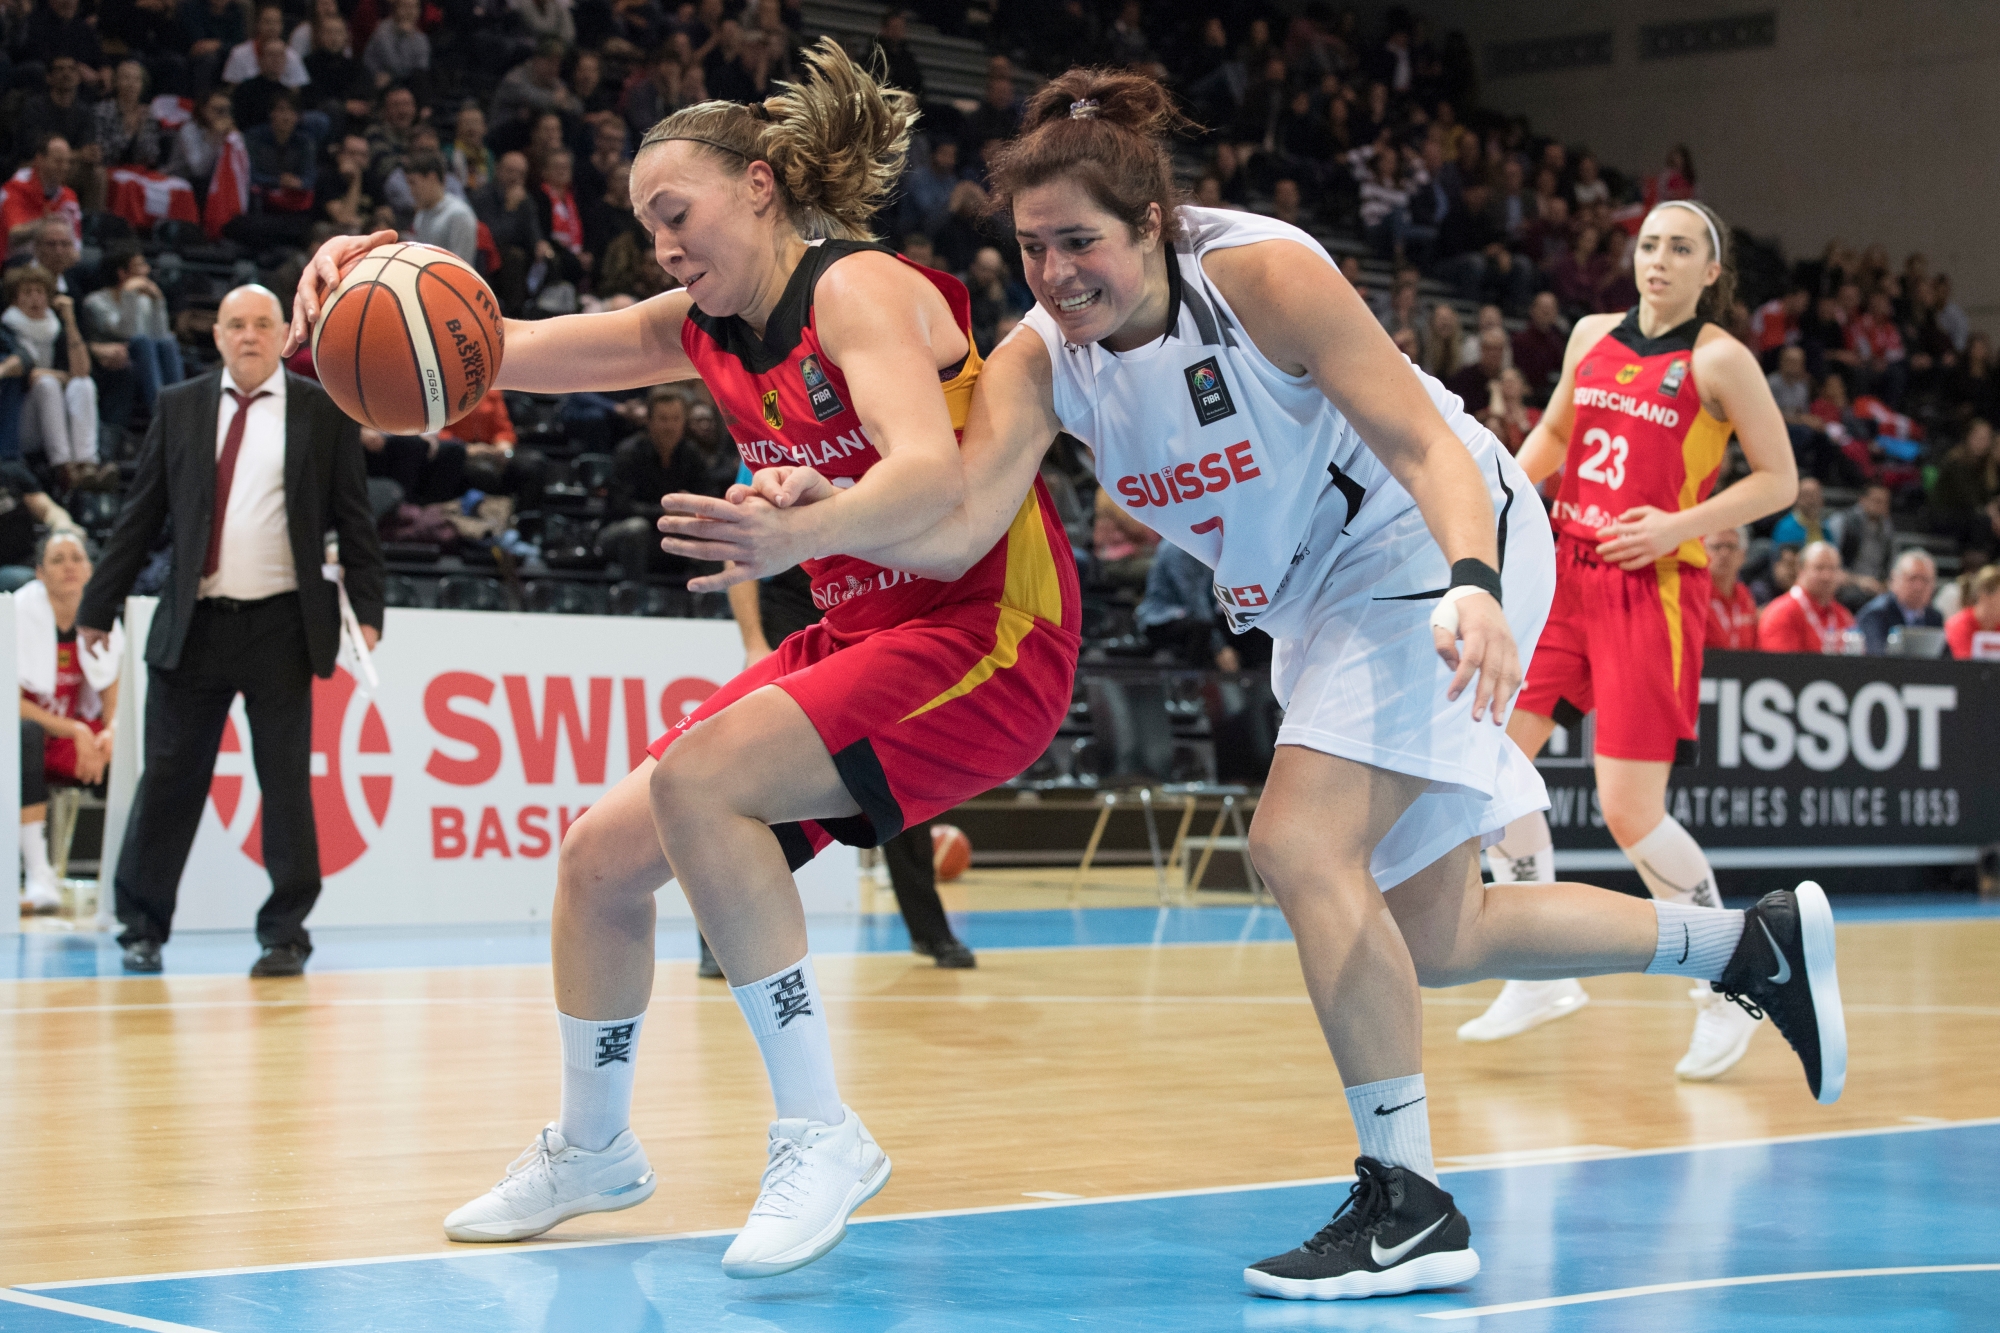 $g21 Germany's Svenja Brunckhorst, left, and Switzerland's Katia Clement, right, fight for the ball during a qualifying match of Group Phase G of FIBA Women's Eurobasket 2019 Qualifiers, between Switzerland and Germany, this Saturday, February 10, 2018 at Fribourg, Switzerland. (KEYSTONE/Anthony Anex) SWITZERLAND BASKETBALL CHE GER